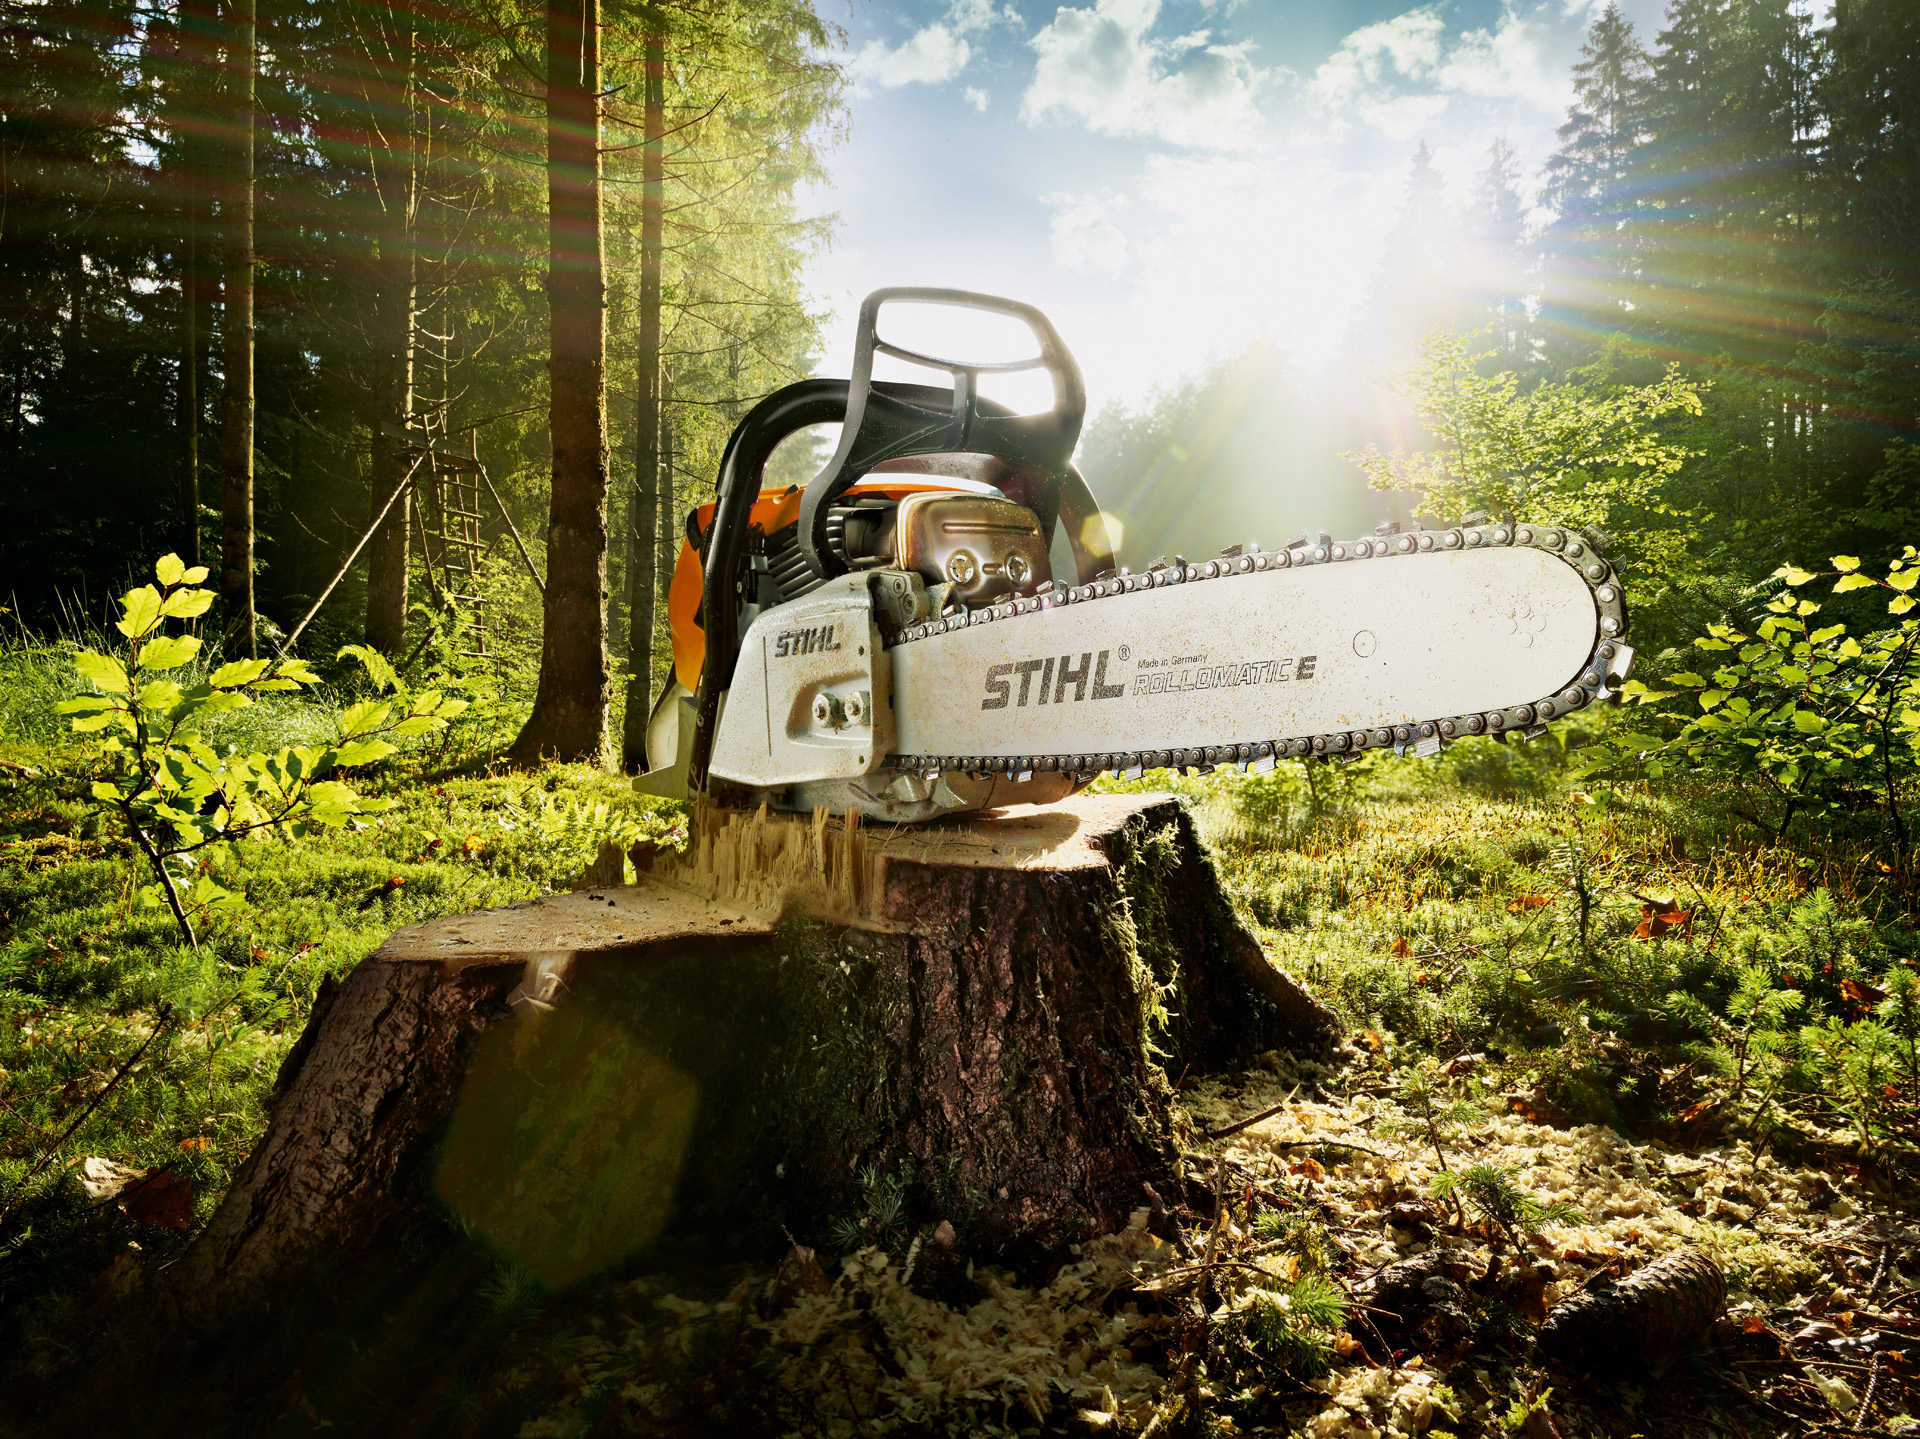 Chainsaw on a log in a field